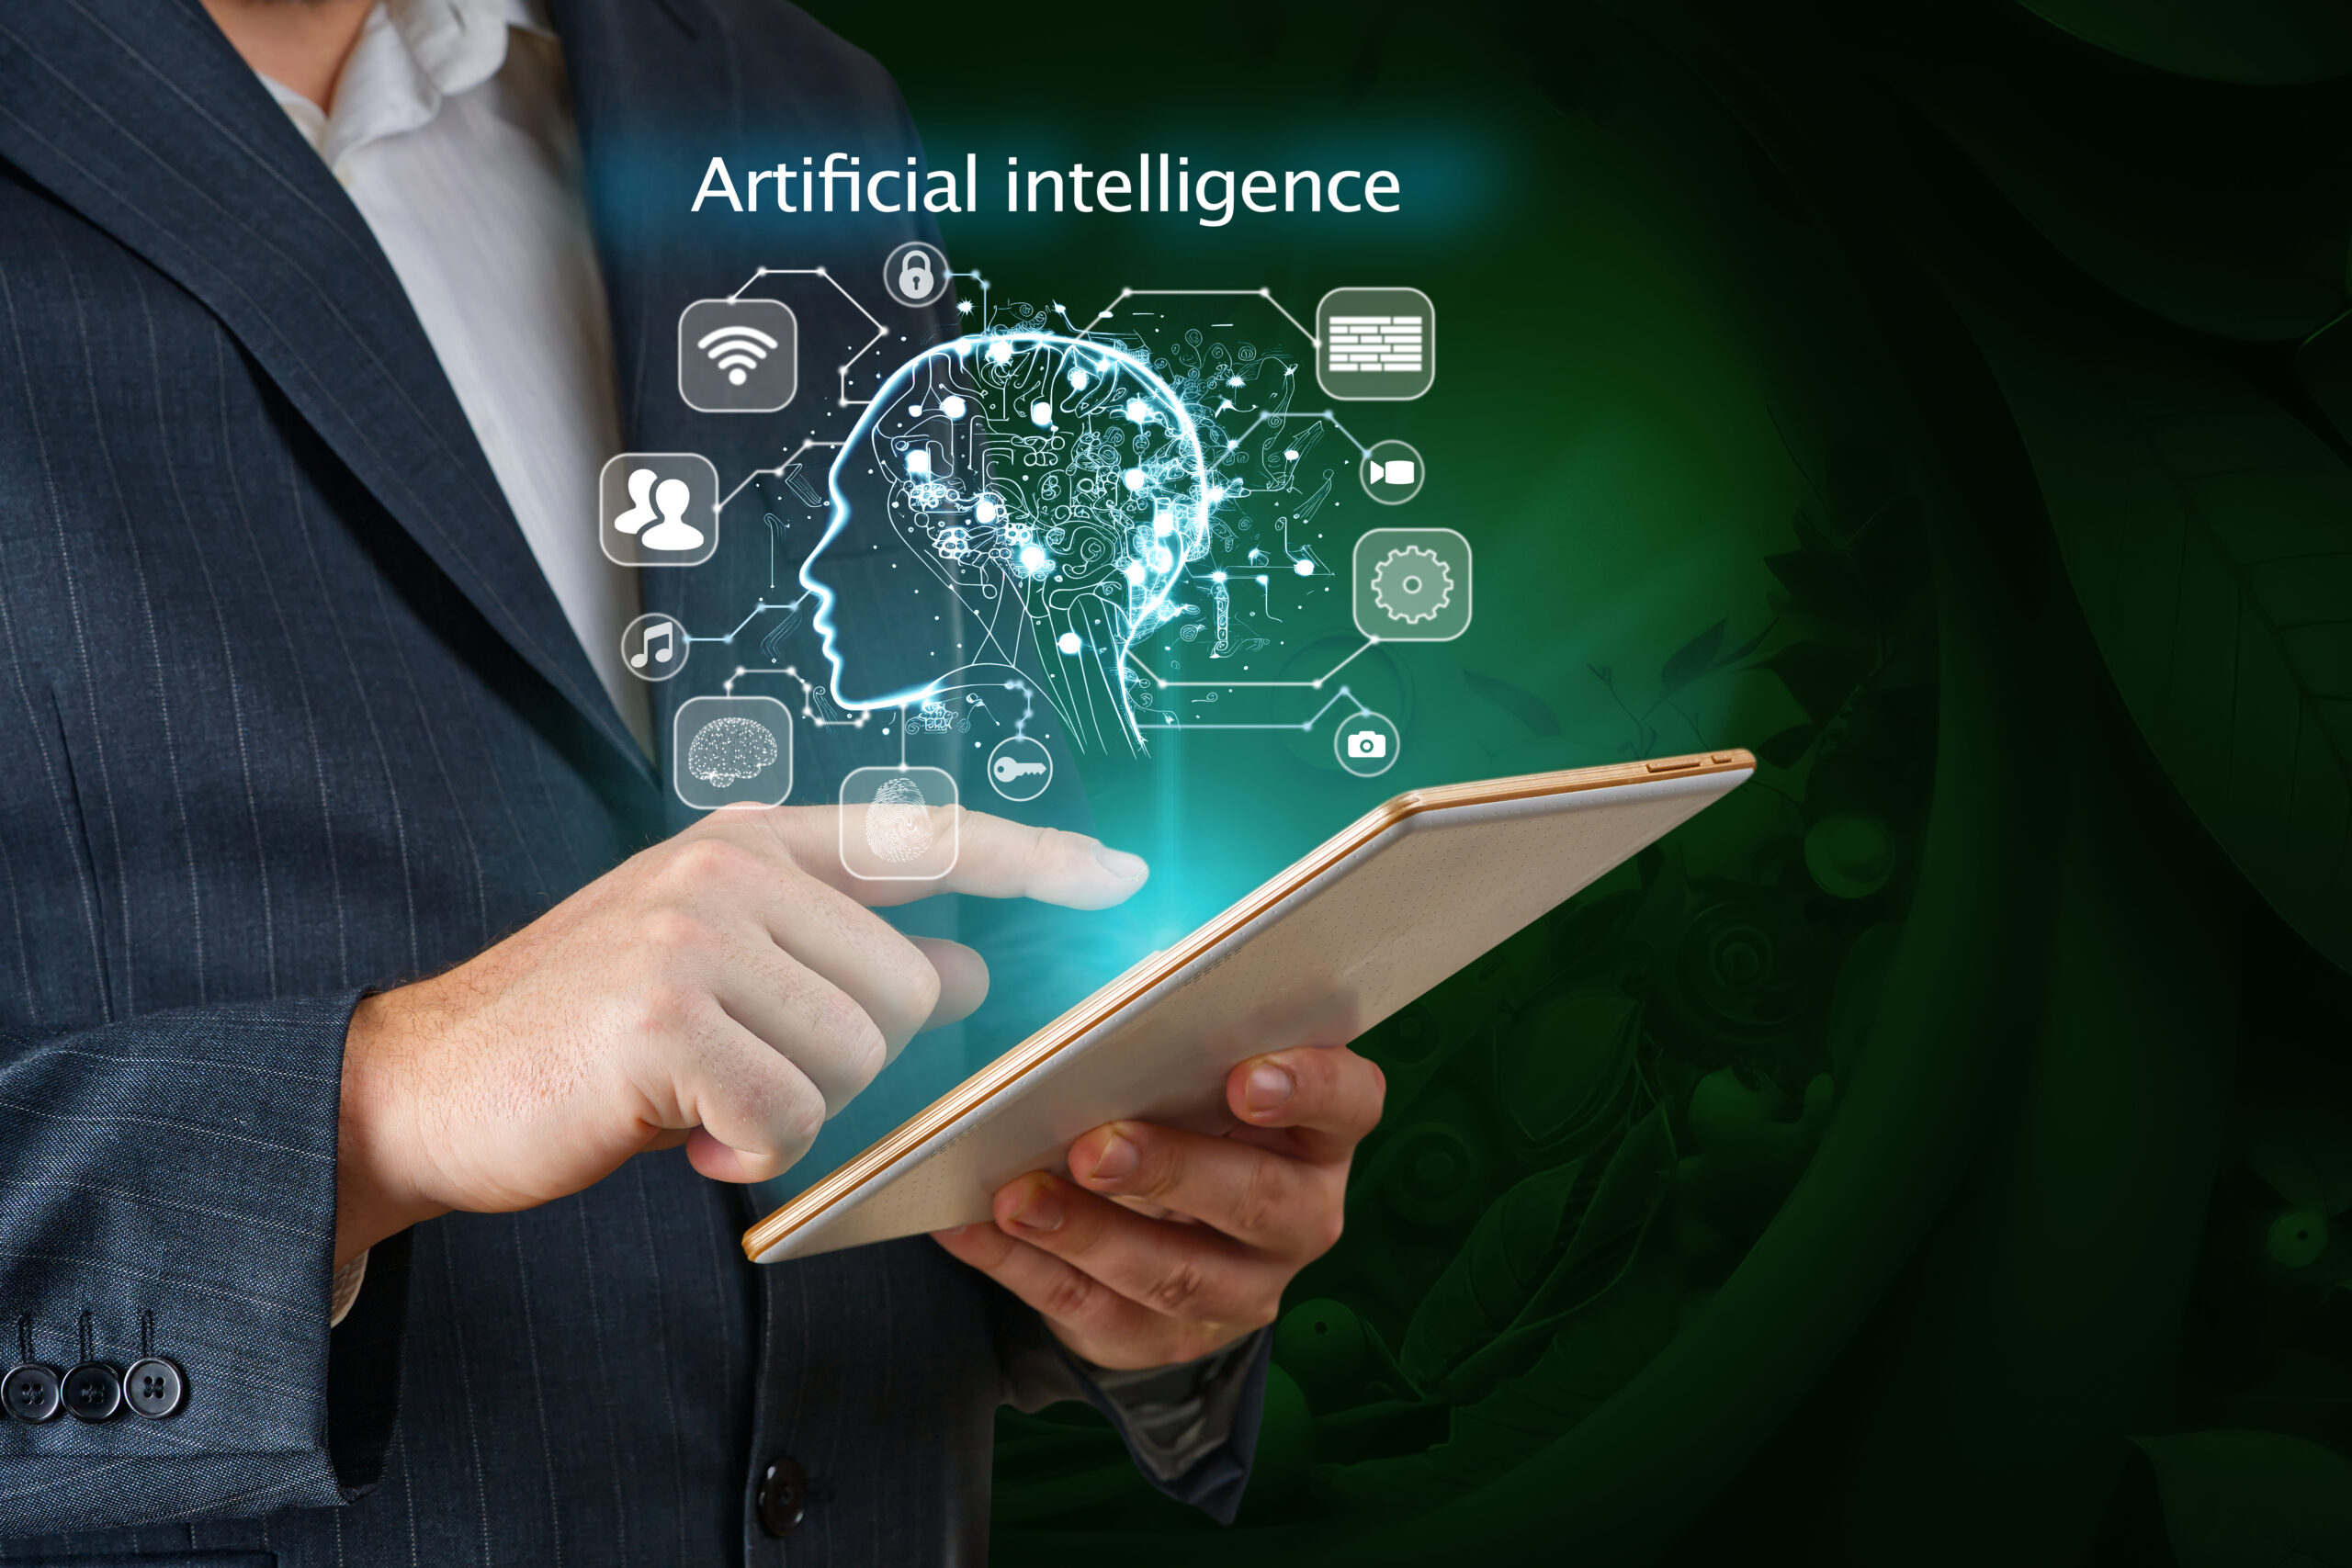 The cover of the article features a photo of a white man in a suit holding a tablet, in front of which is an illustration with the title artificial intelligence and a brain in profile.